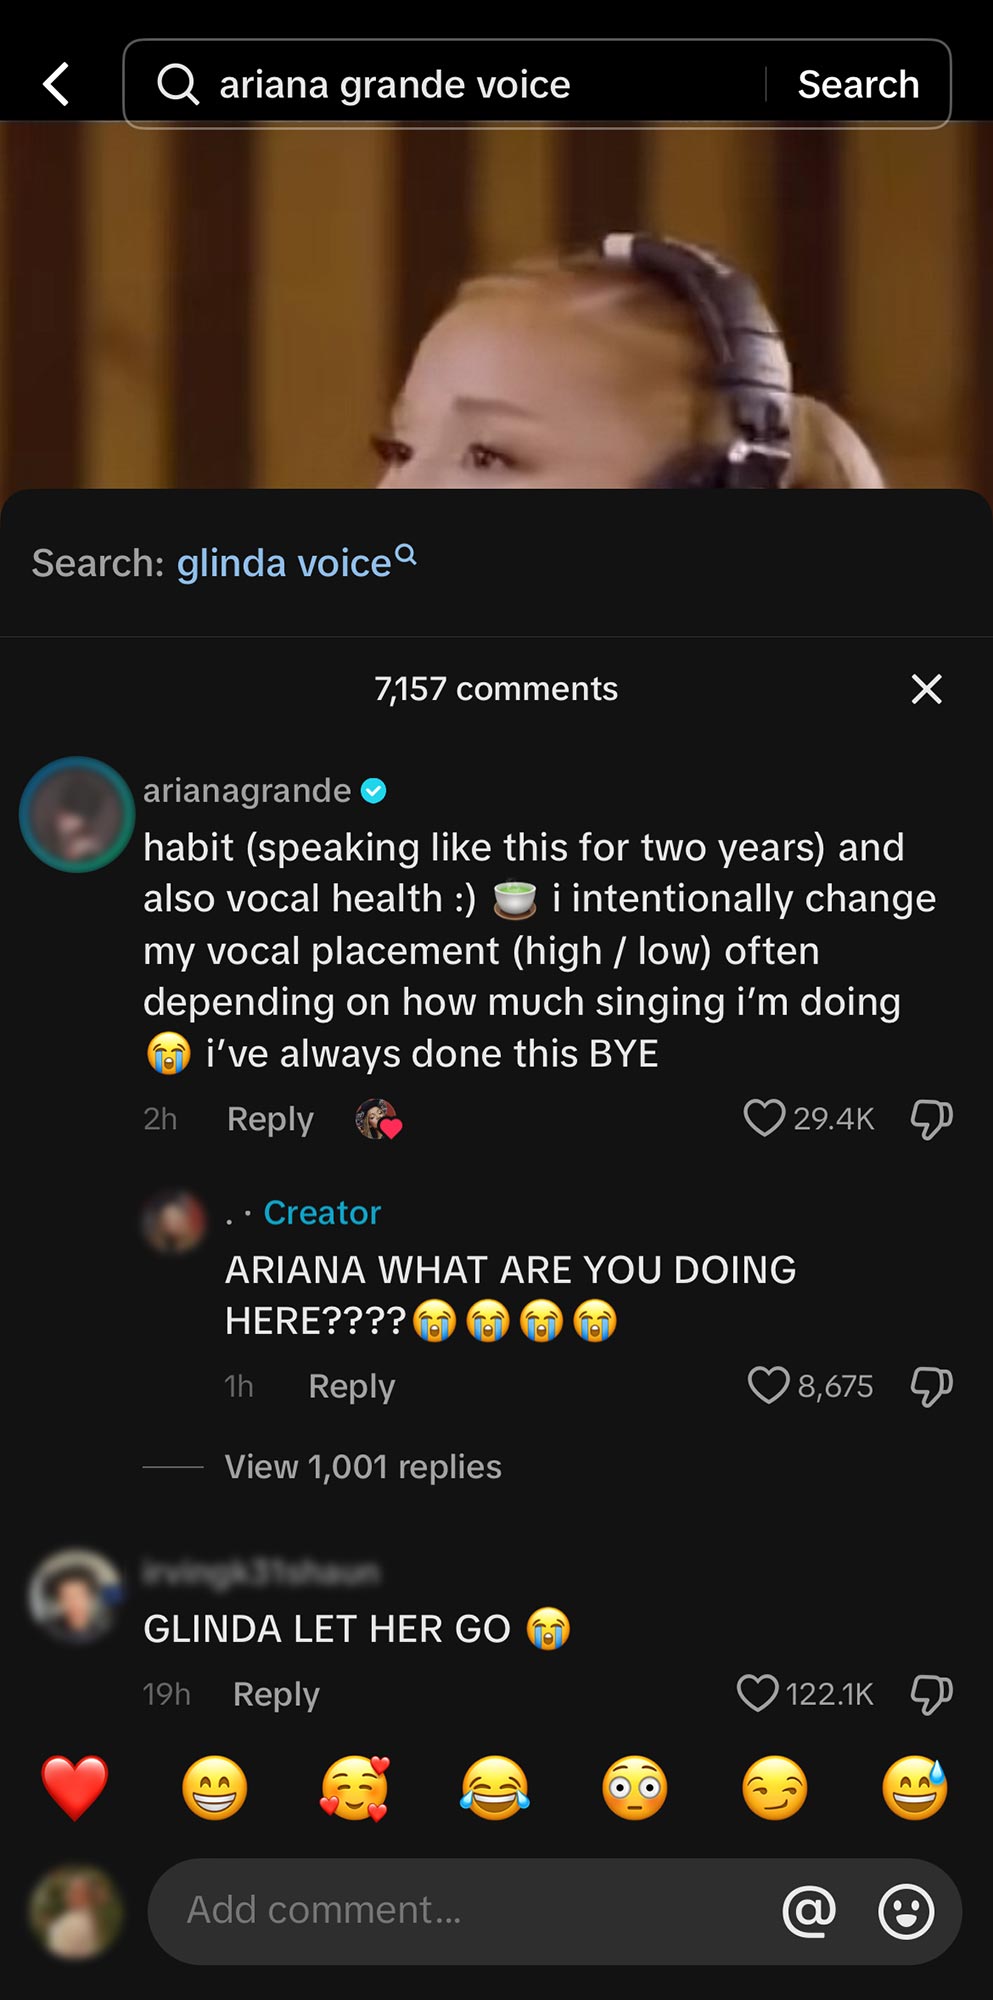 Ariana Grande Addresses Viral Vocal Fry Calling It a ‘Habit’ for the Past ‘2 Years’